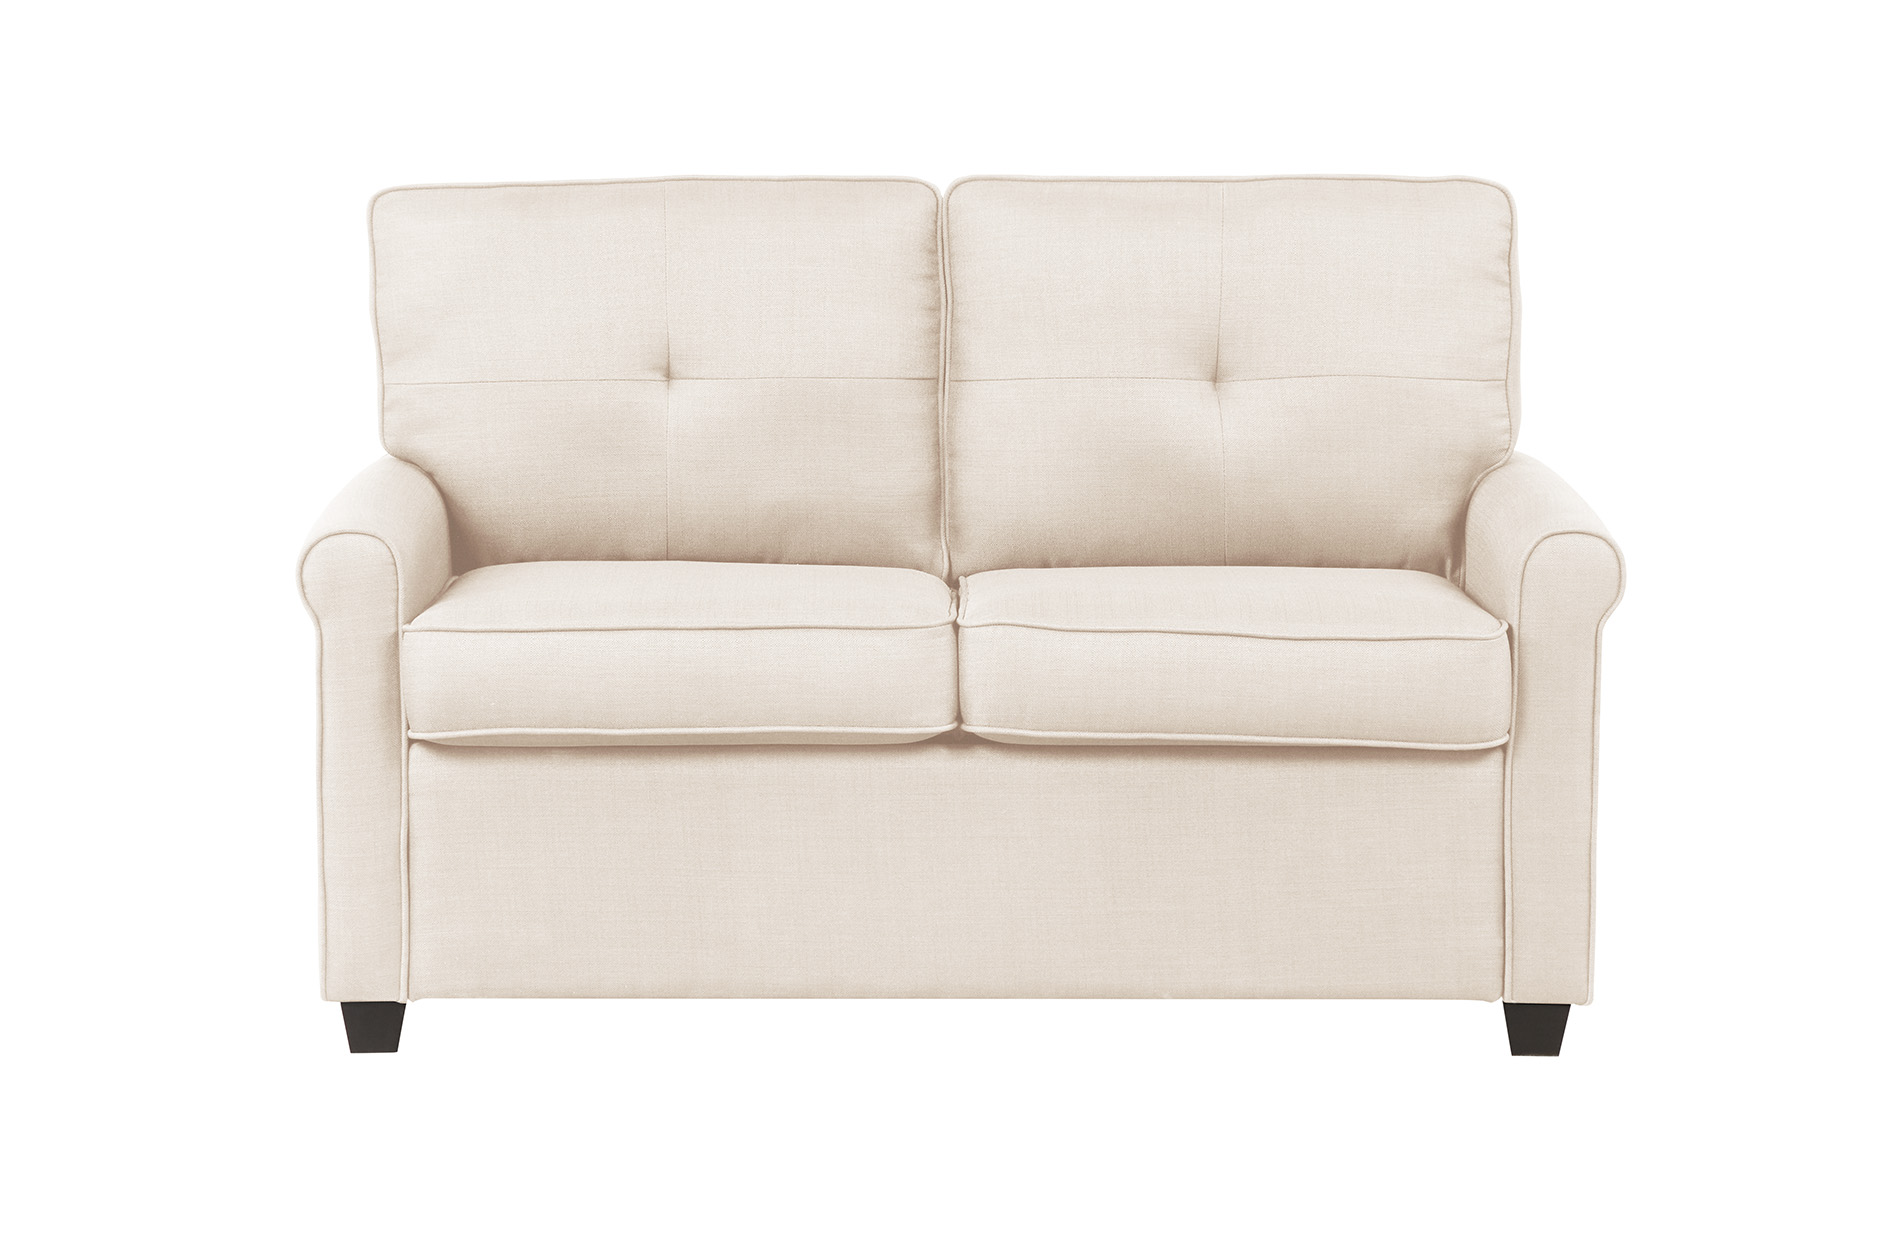 Mainstays Traditional Loveseat Sleeper with USB, Oat, 2 Seaters, Living Room - image 5 of 10